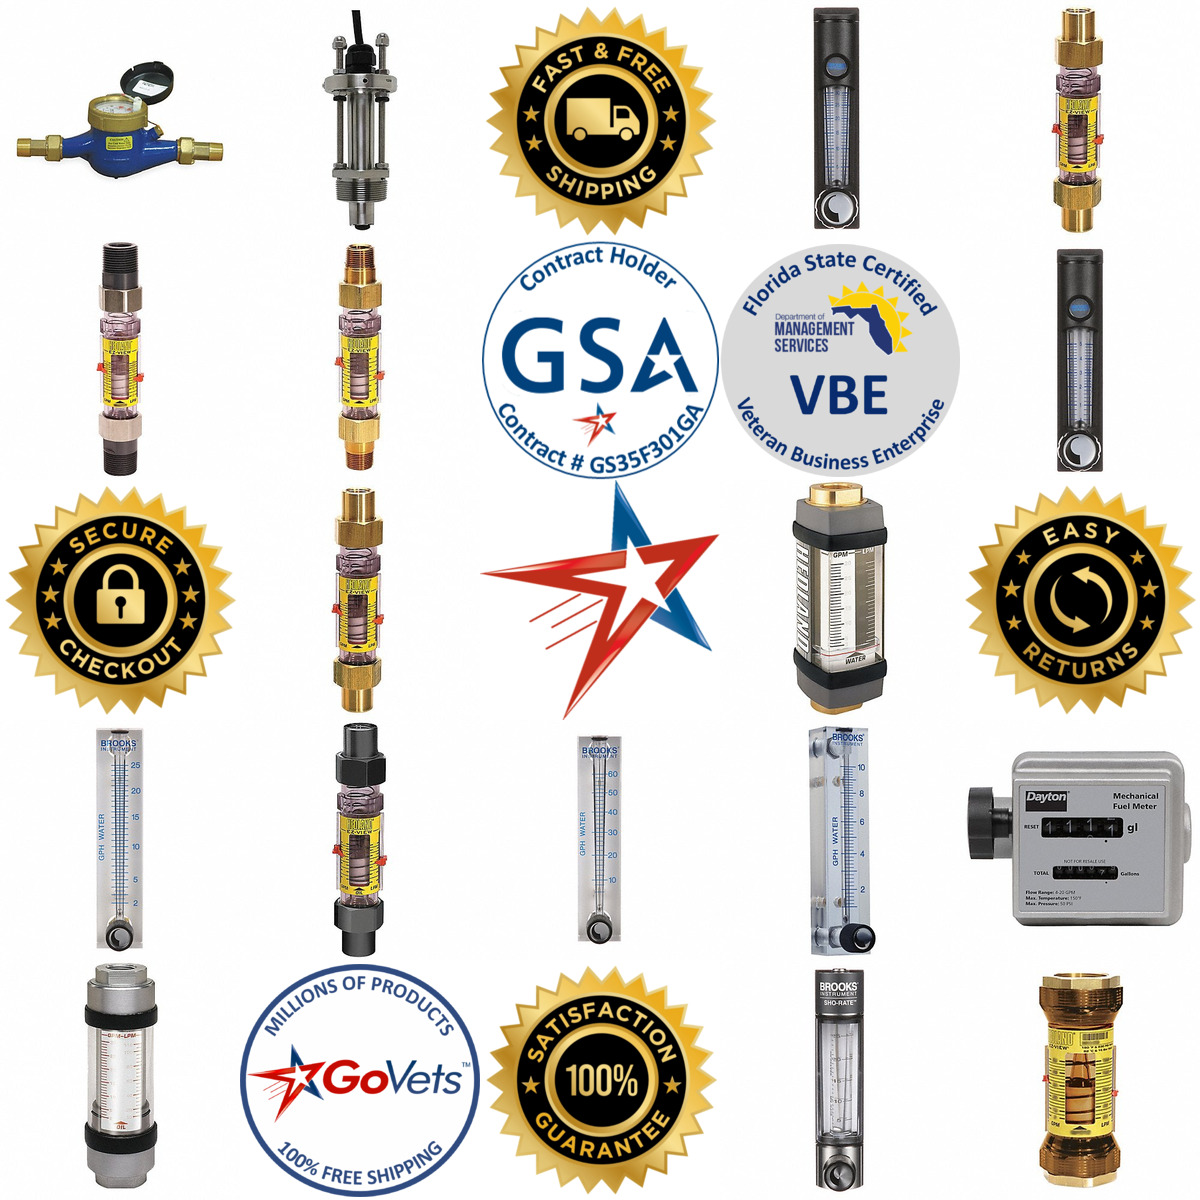 A selection of Flowmeters products on GoVets